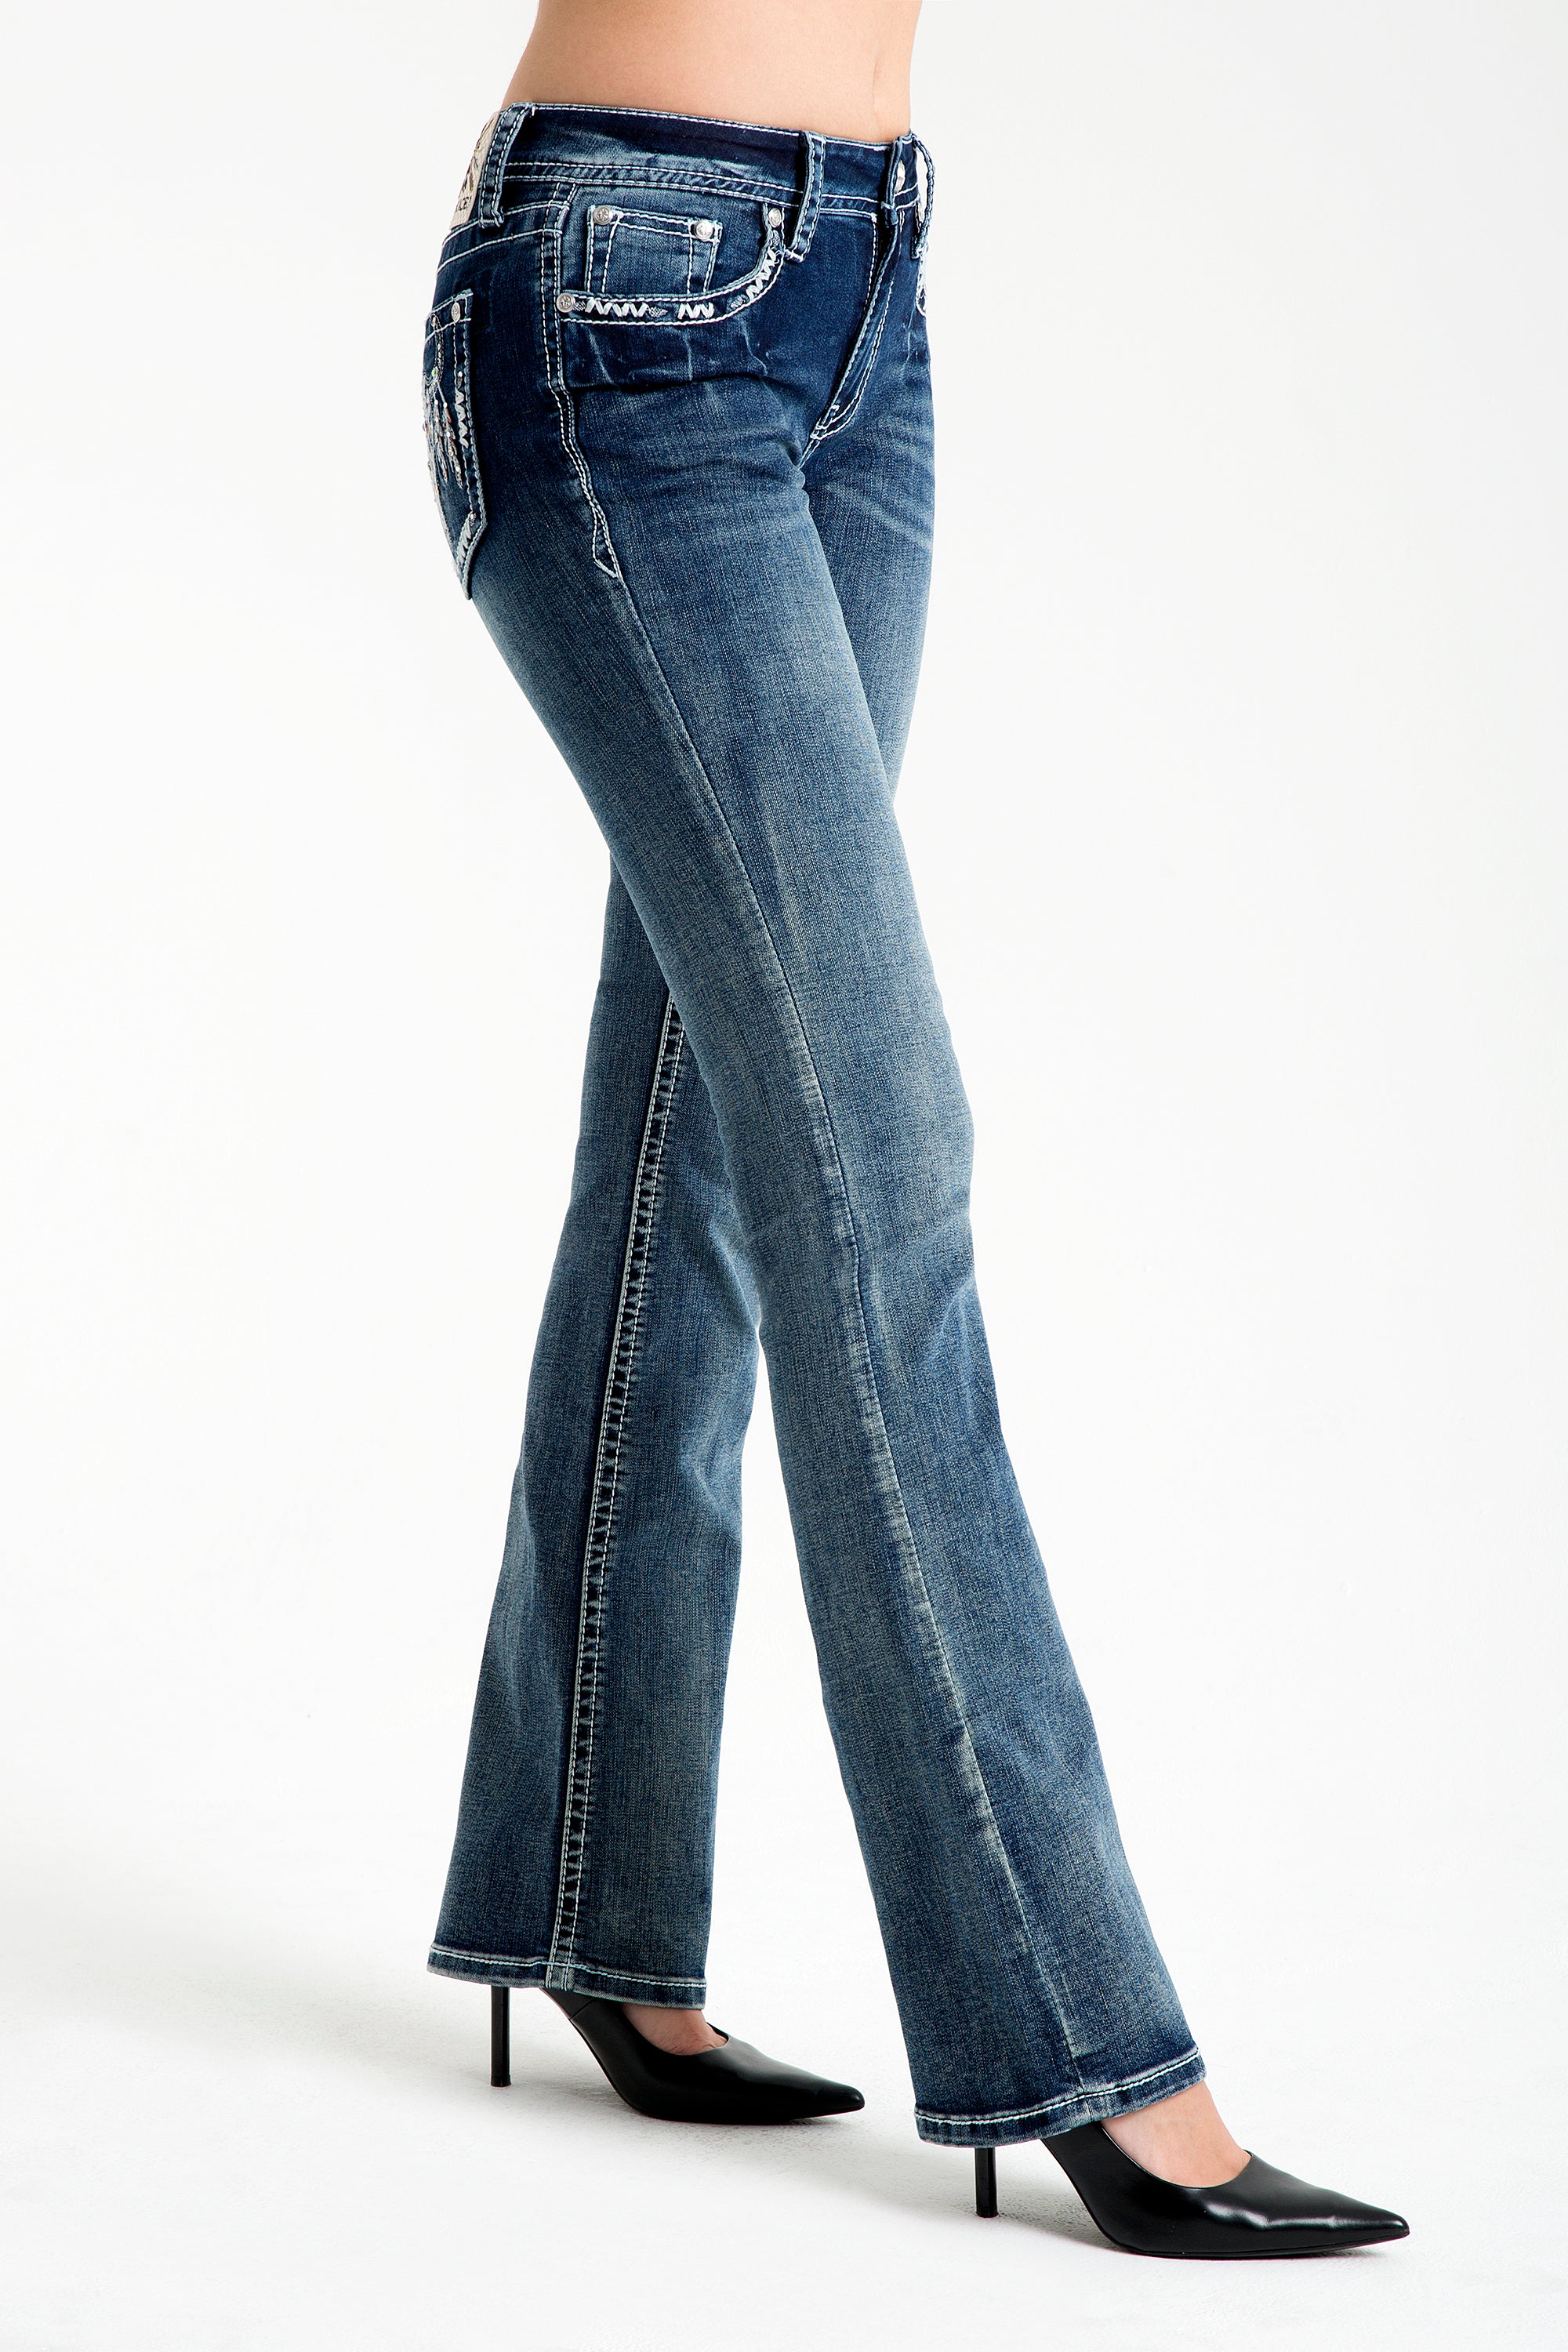 embellished-jeans-midrise-bootcut-jeans